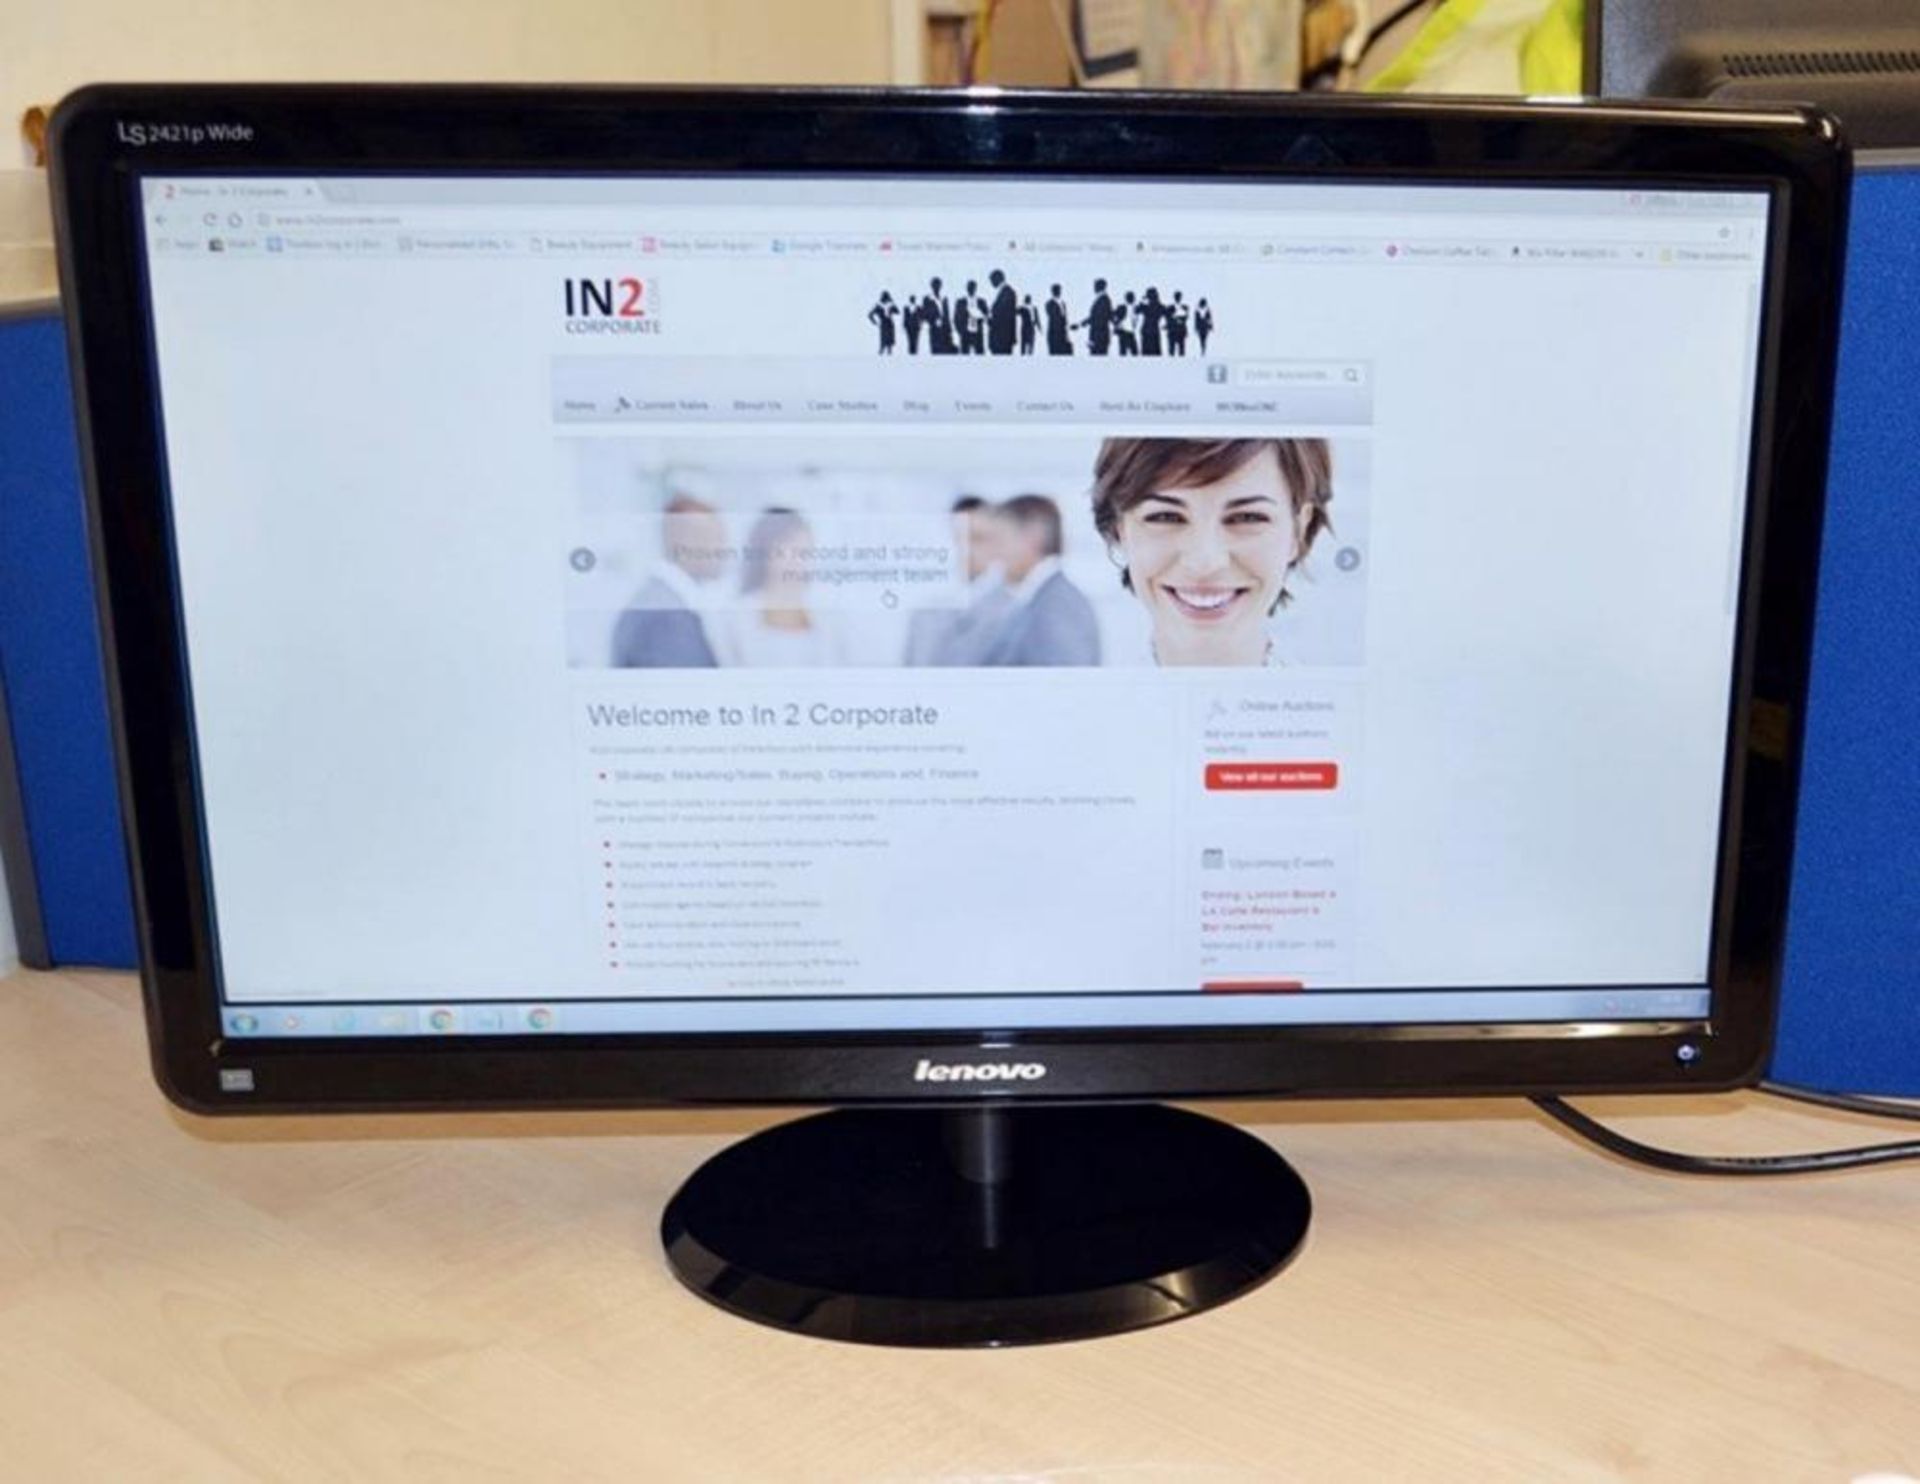 2 x Lenovo LS2421p Wide 23.6" Full HD LED TFT Monitors (Model: 4015-LS1) - Recently Taken From A - Image 3 of 6